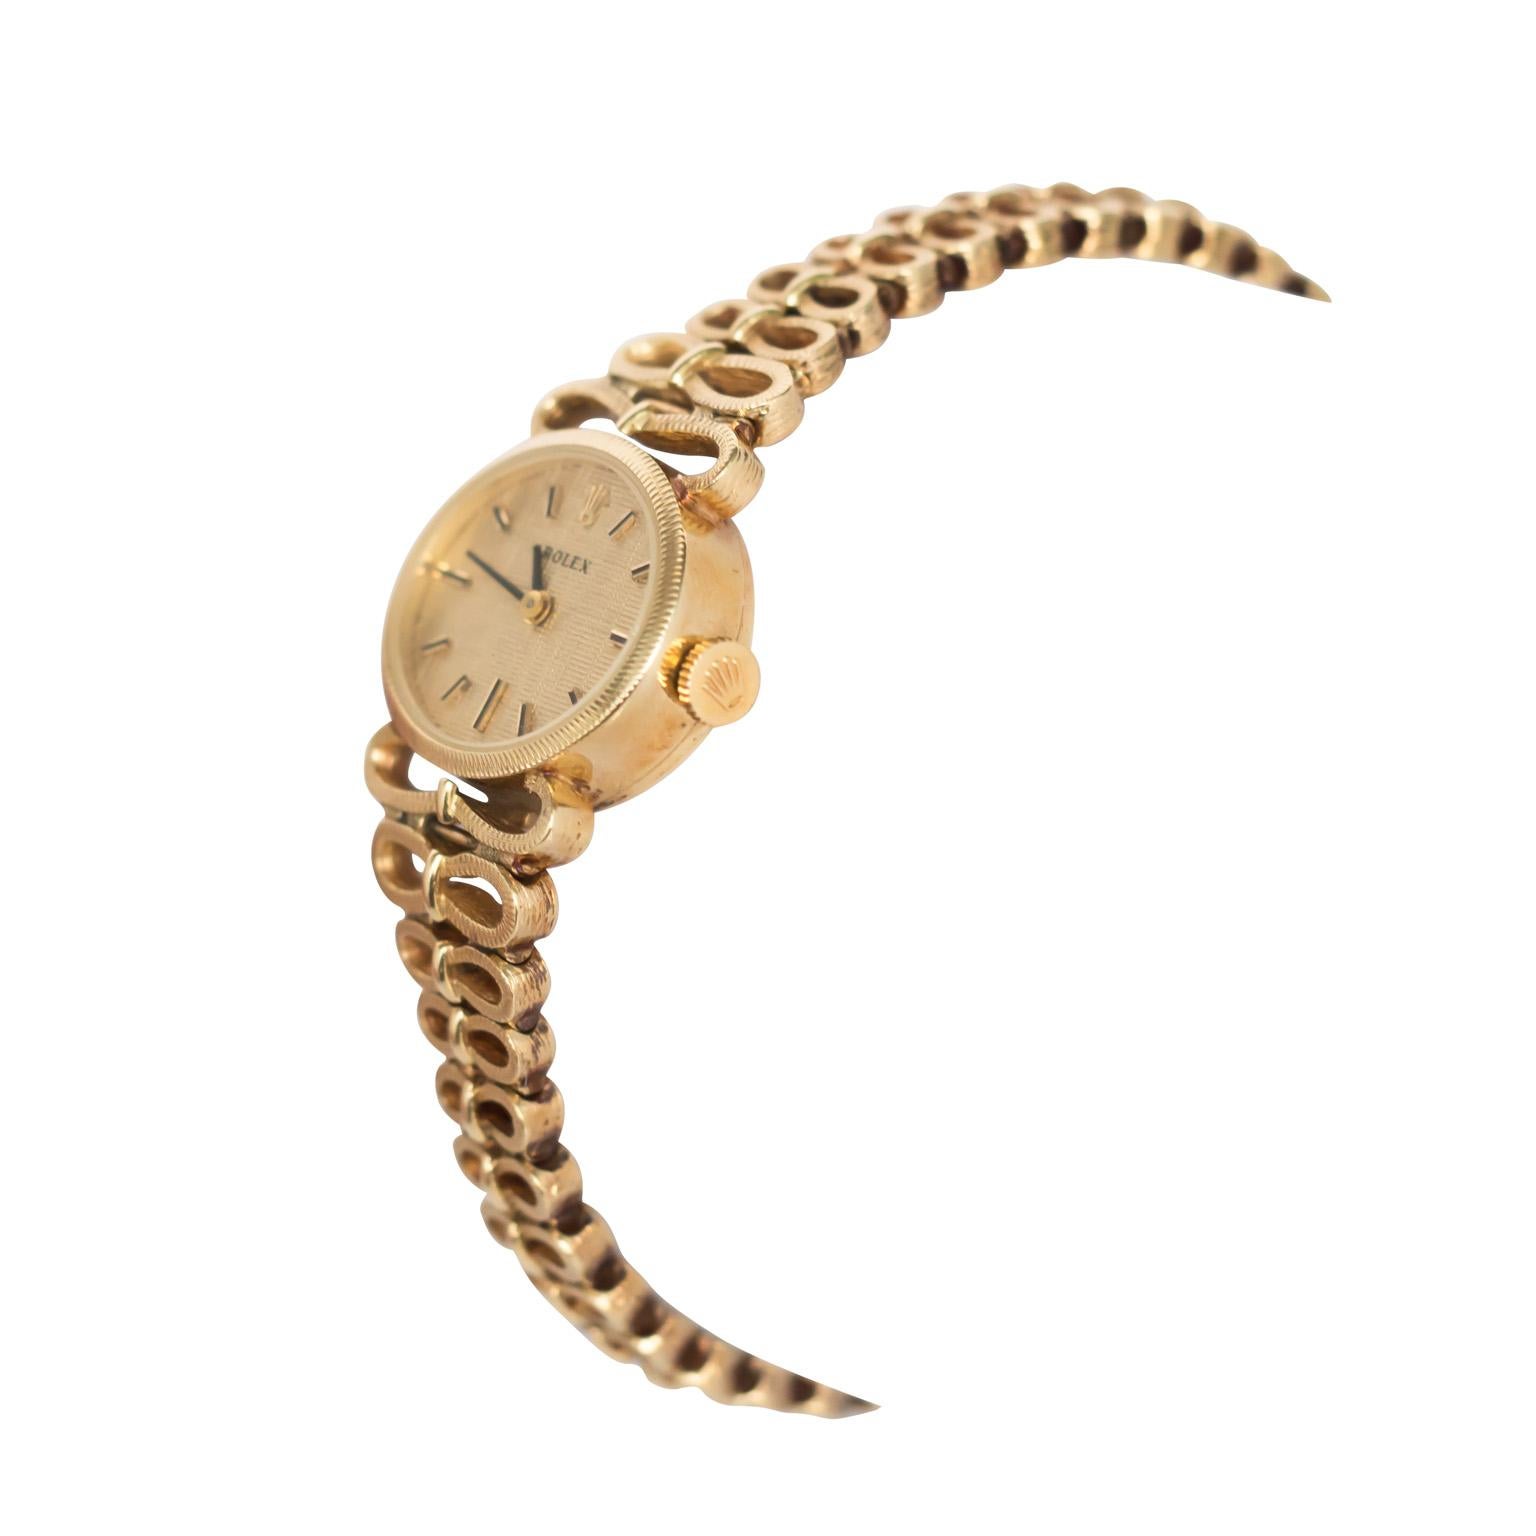 Item Details: 
Length: 6.95 inches 
Metal Type: 14 karat Yellow Gold 
Weight: 36.8 grams
Movement: Manual Wind 

Finger to Top of Stone Measurement: 6.53mm